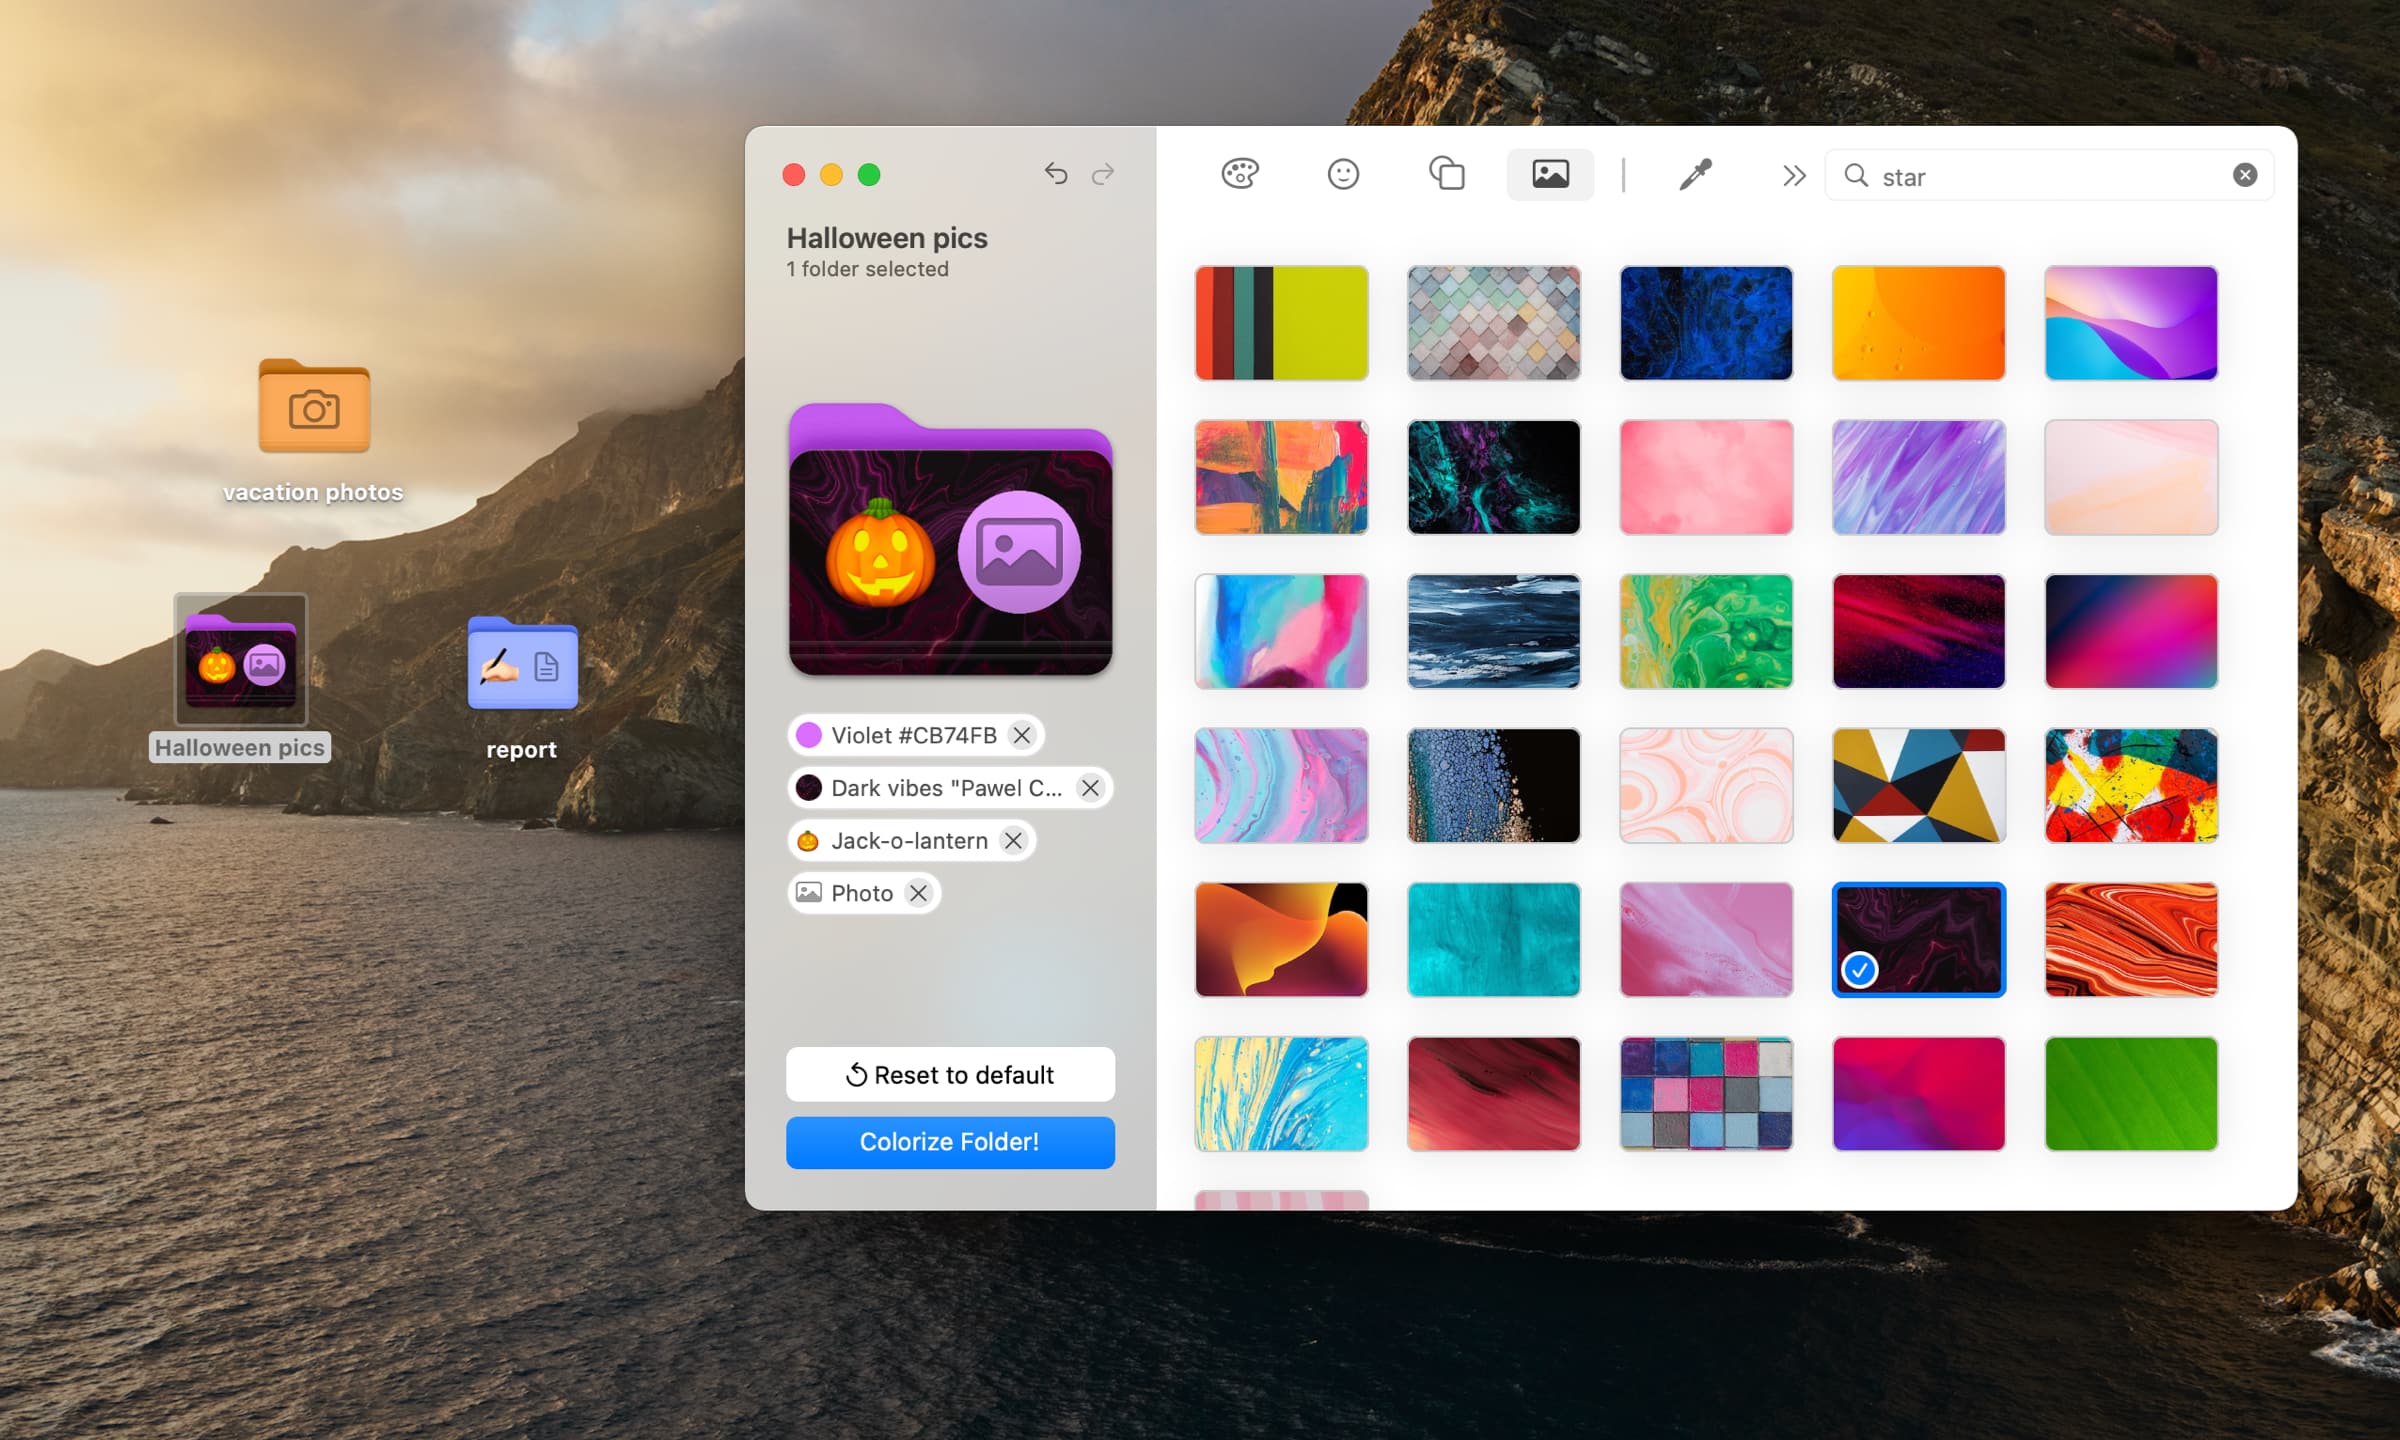 A marketing image from Softorino showcasing customizing a folder icon with an image background in its Folder Colorizer app for macOS